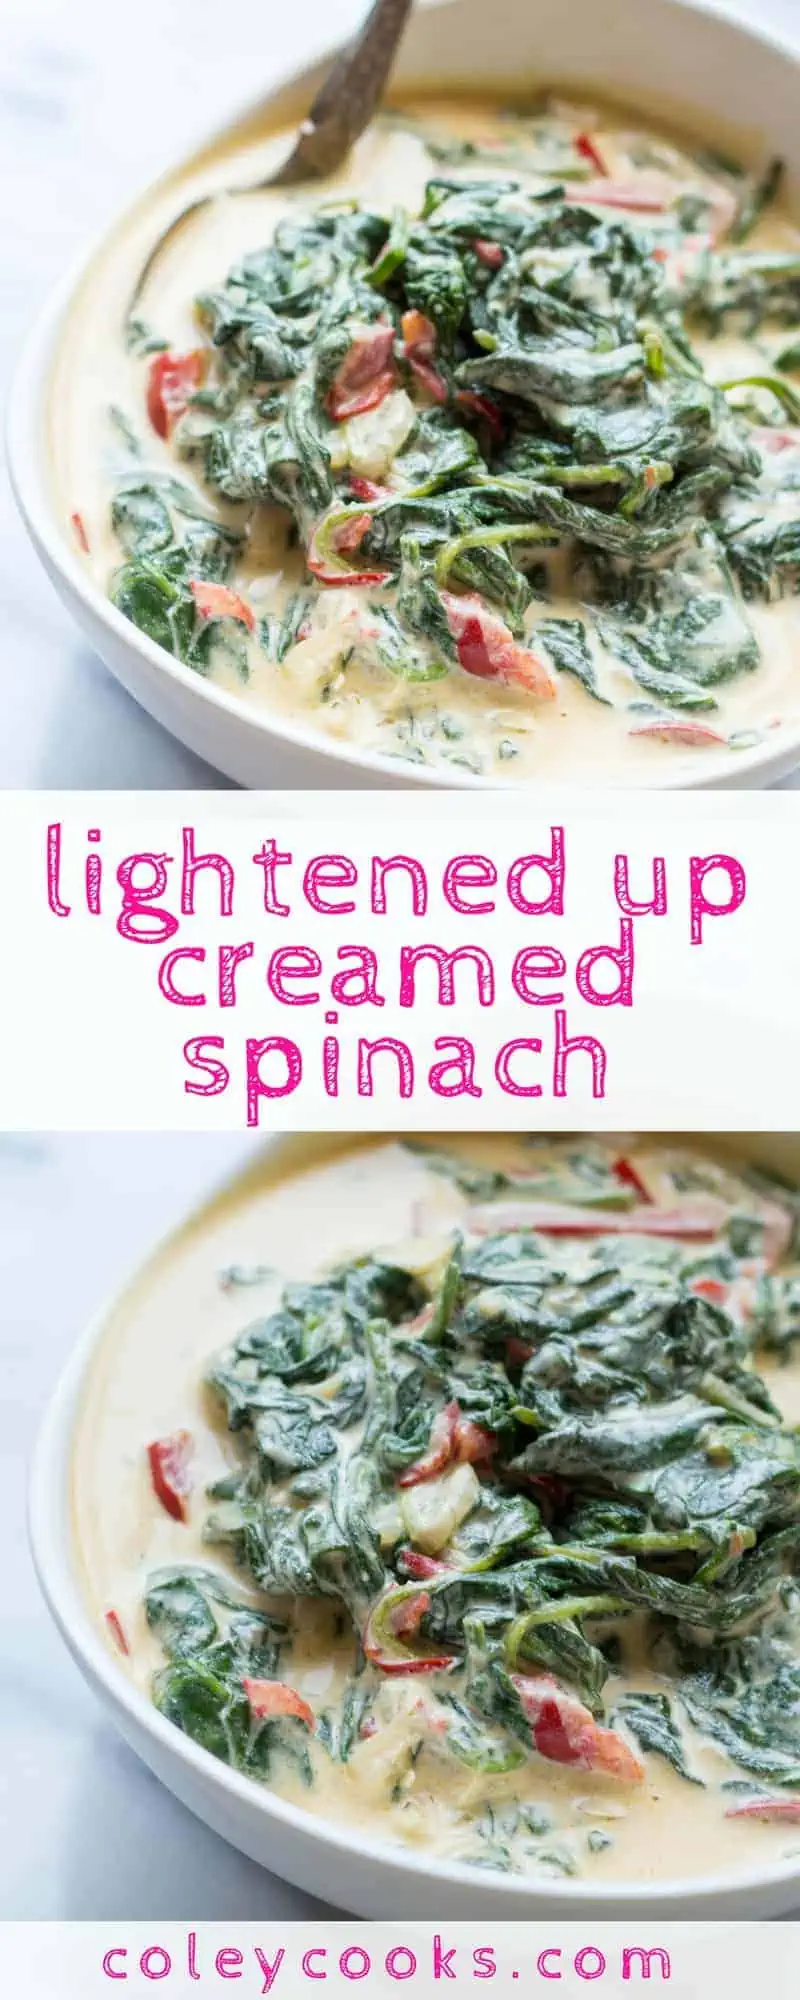 LIGHTENED UP CREAMED SPINACH | This easy recipe for creamed spinach uses Greek yogurt instead of cream for less calories and higher protein! #glutenfree | ColeyCooks.com